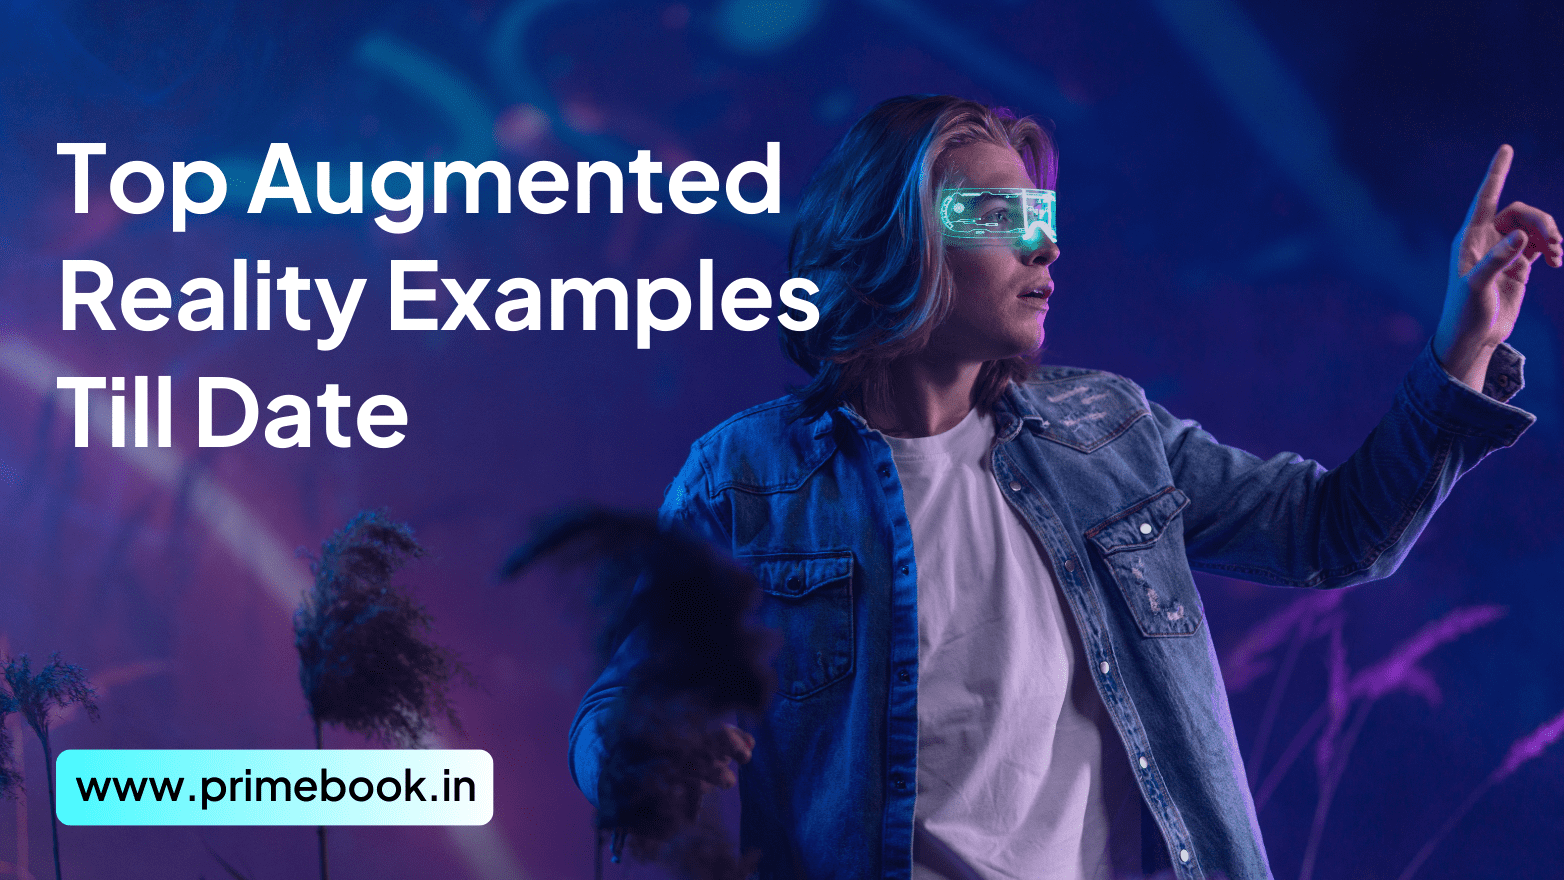 What Are The Top Augmented Reality Examples Till Date?